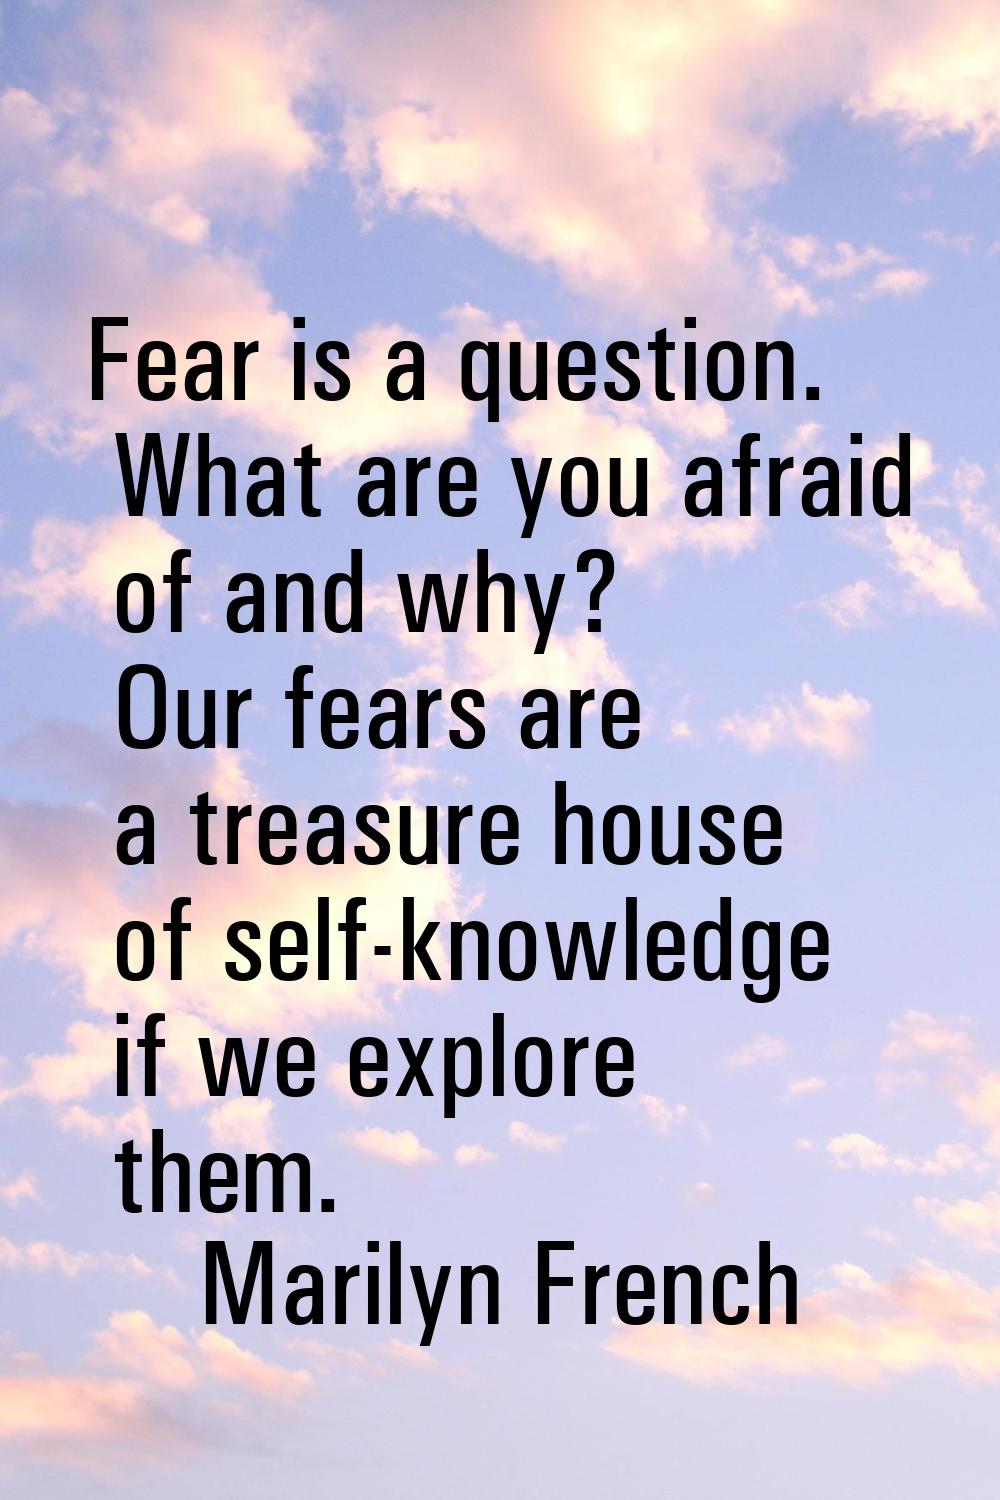 Fear is a question. What are you afraid of and why? Our fears are a treasure house of self-knowledg